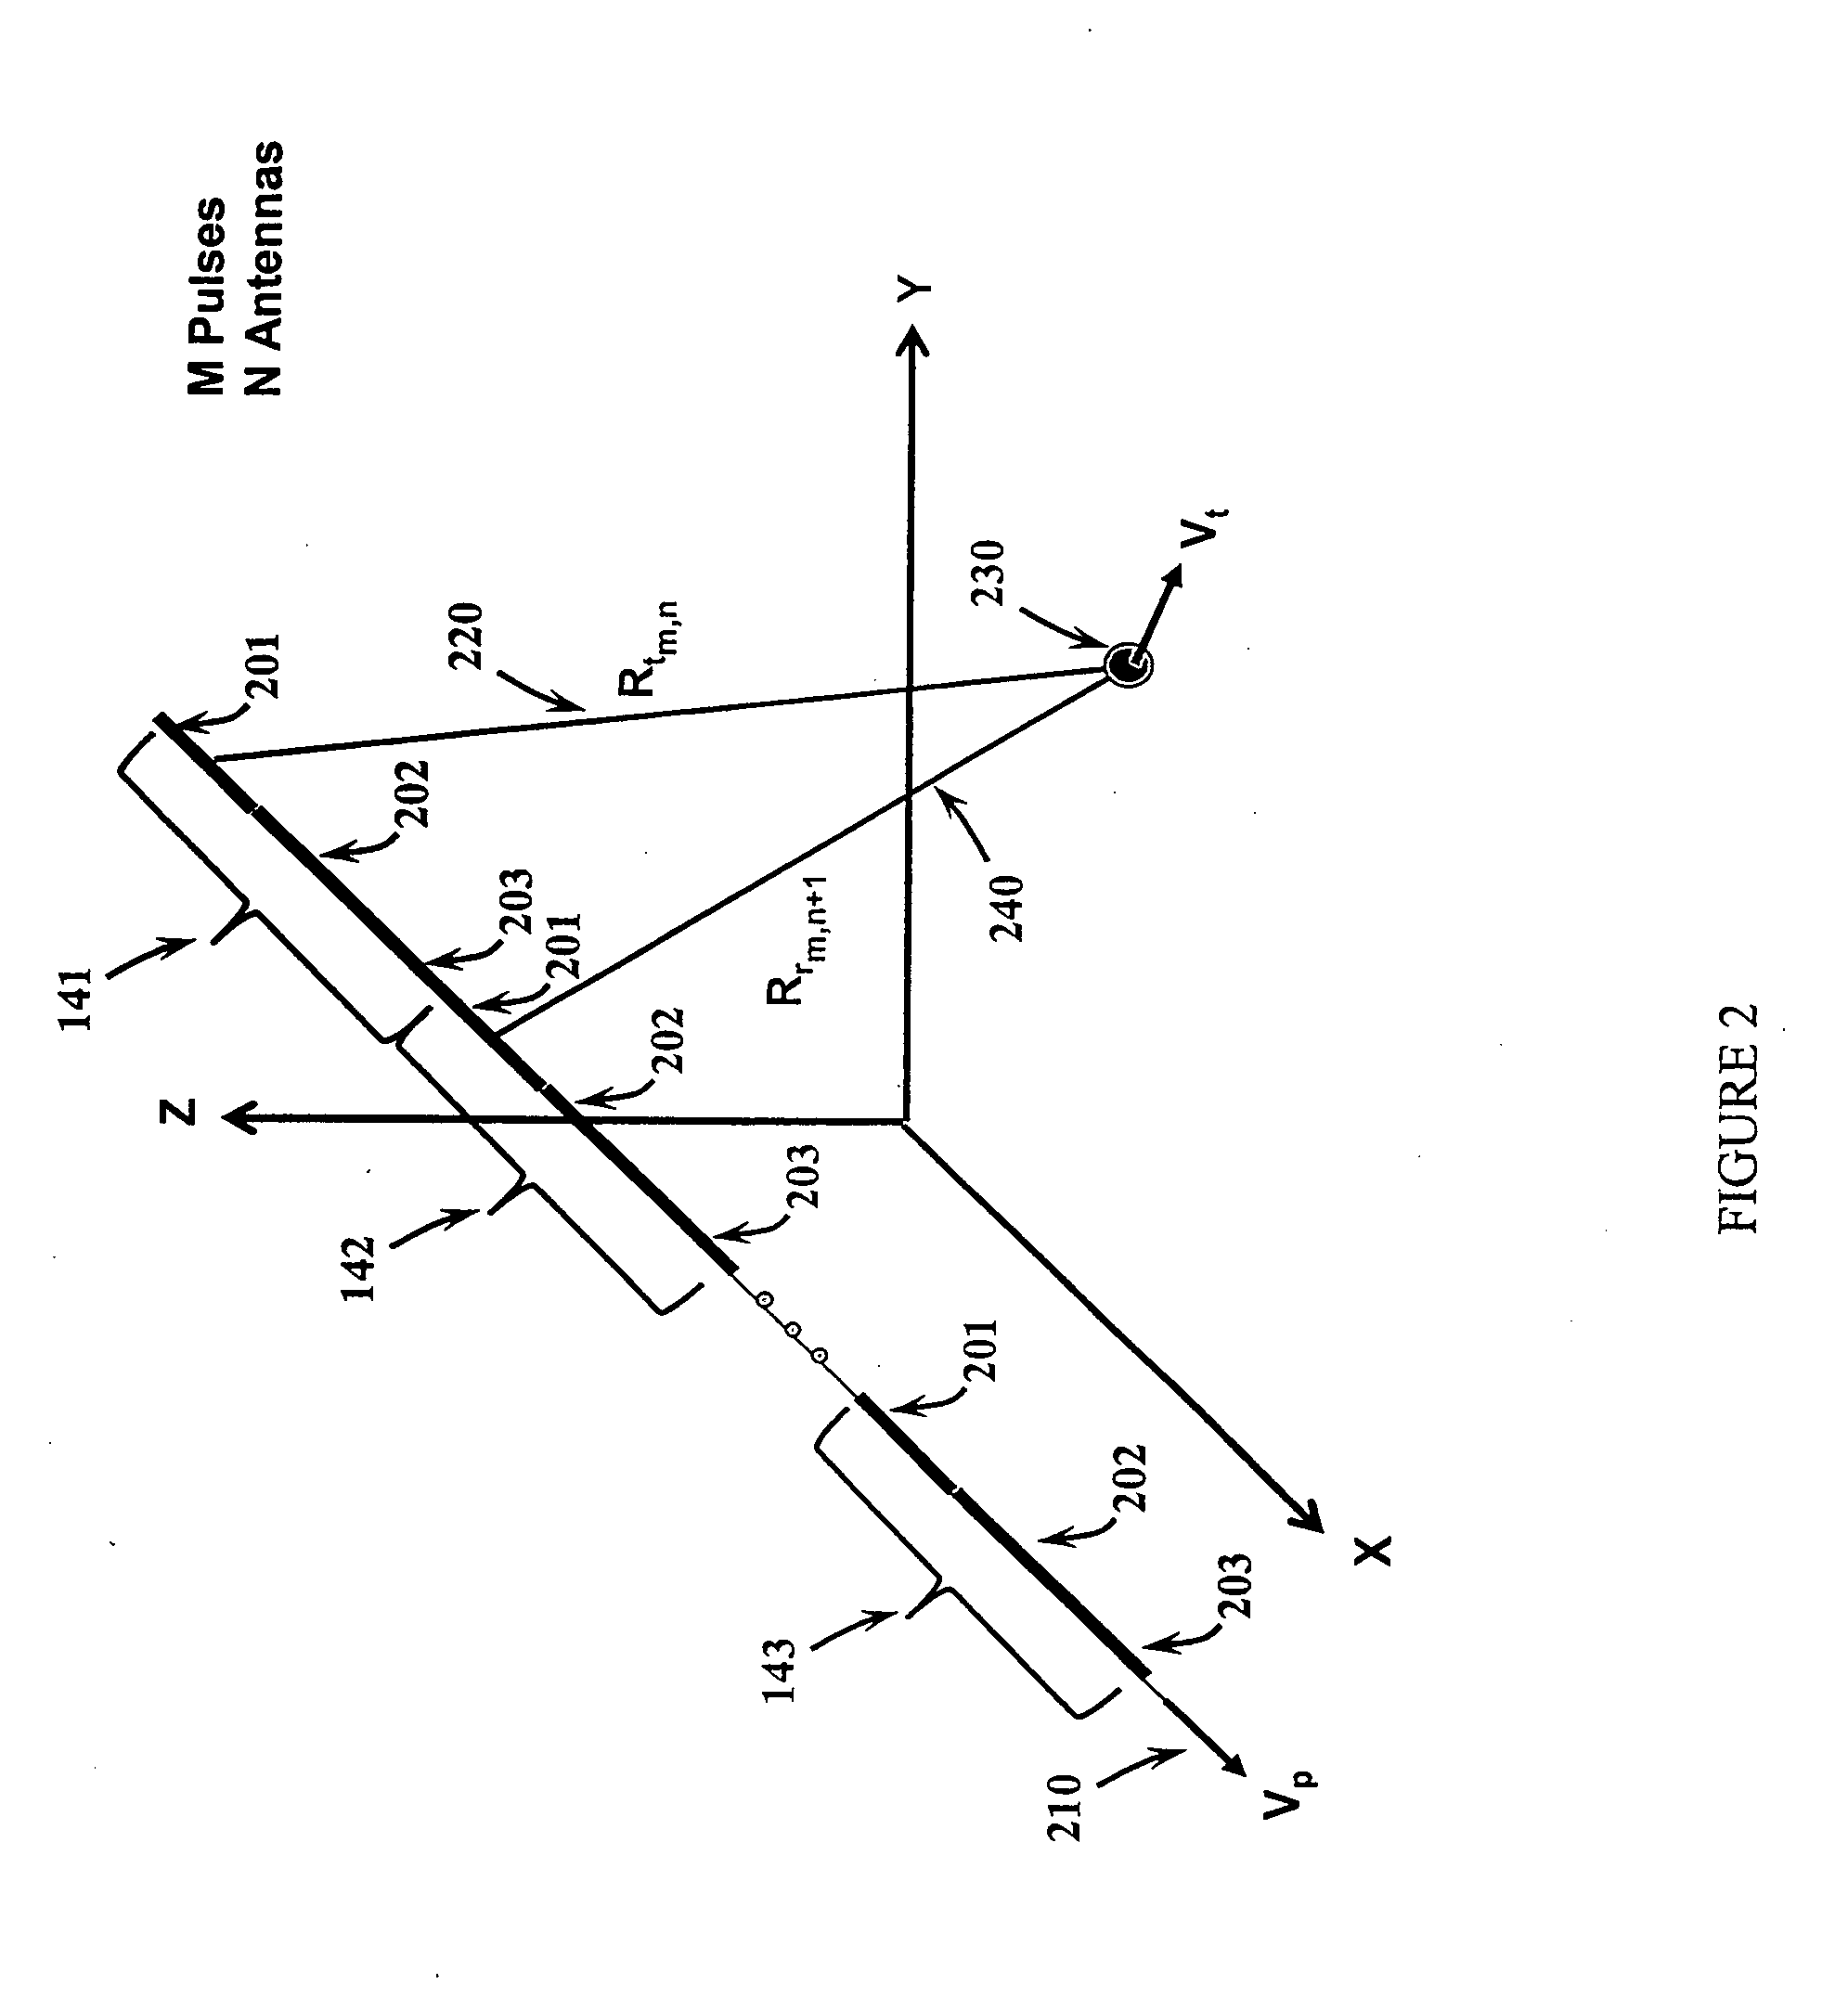 Method and apparatus for simultaneous synthetic aperture radar and moving target indication